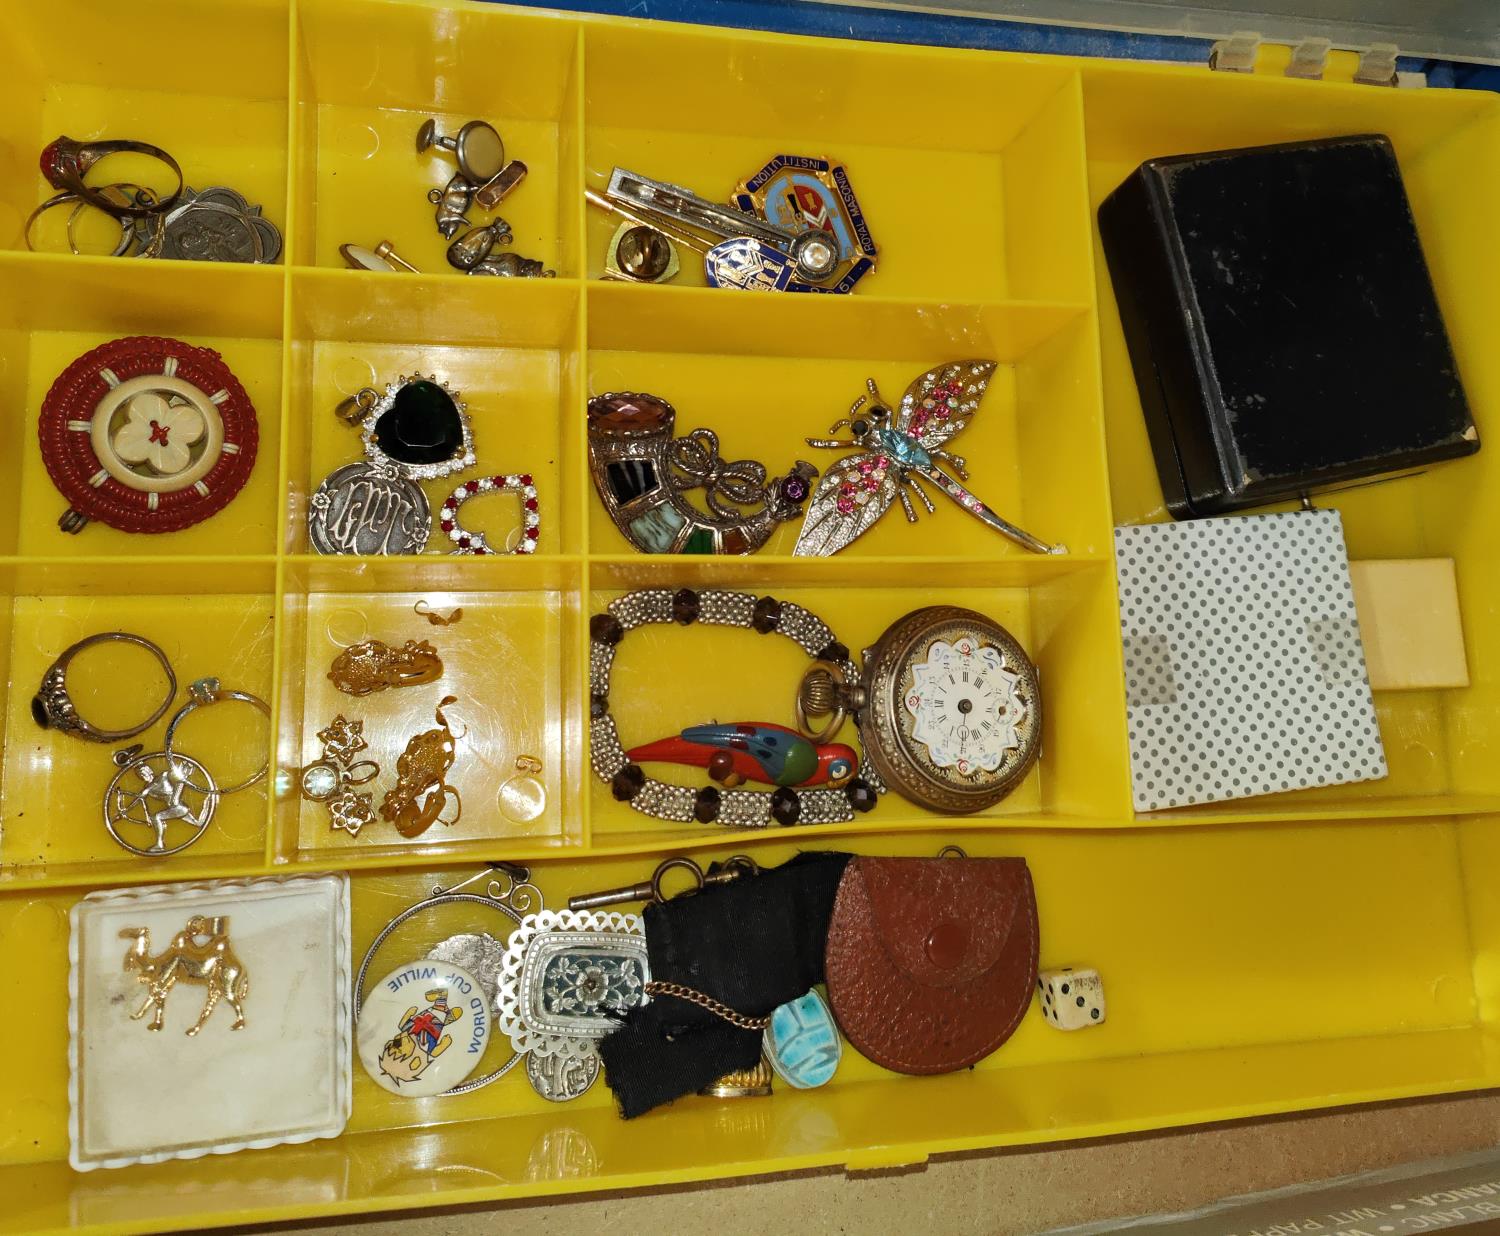 A selection of costume jewellery